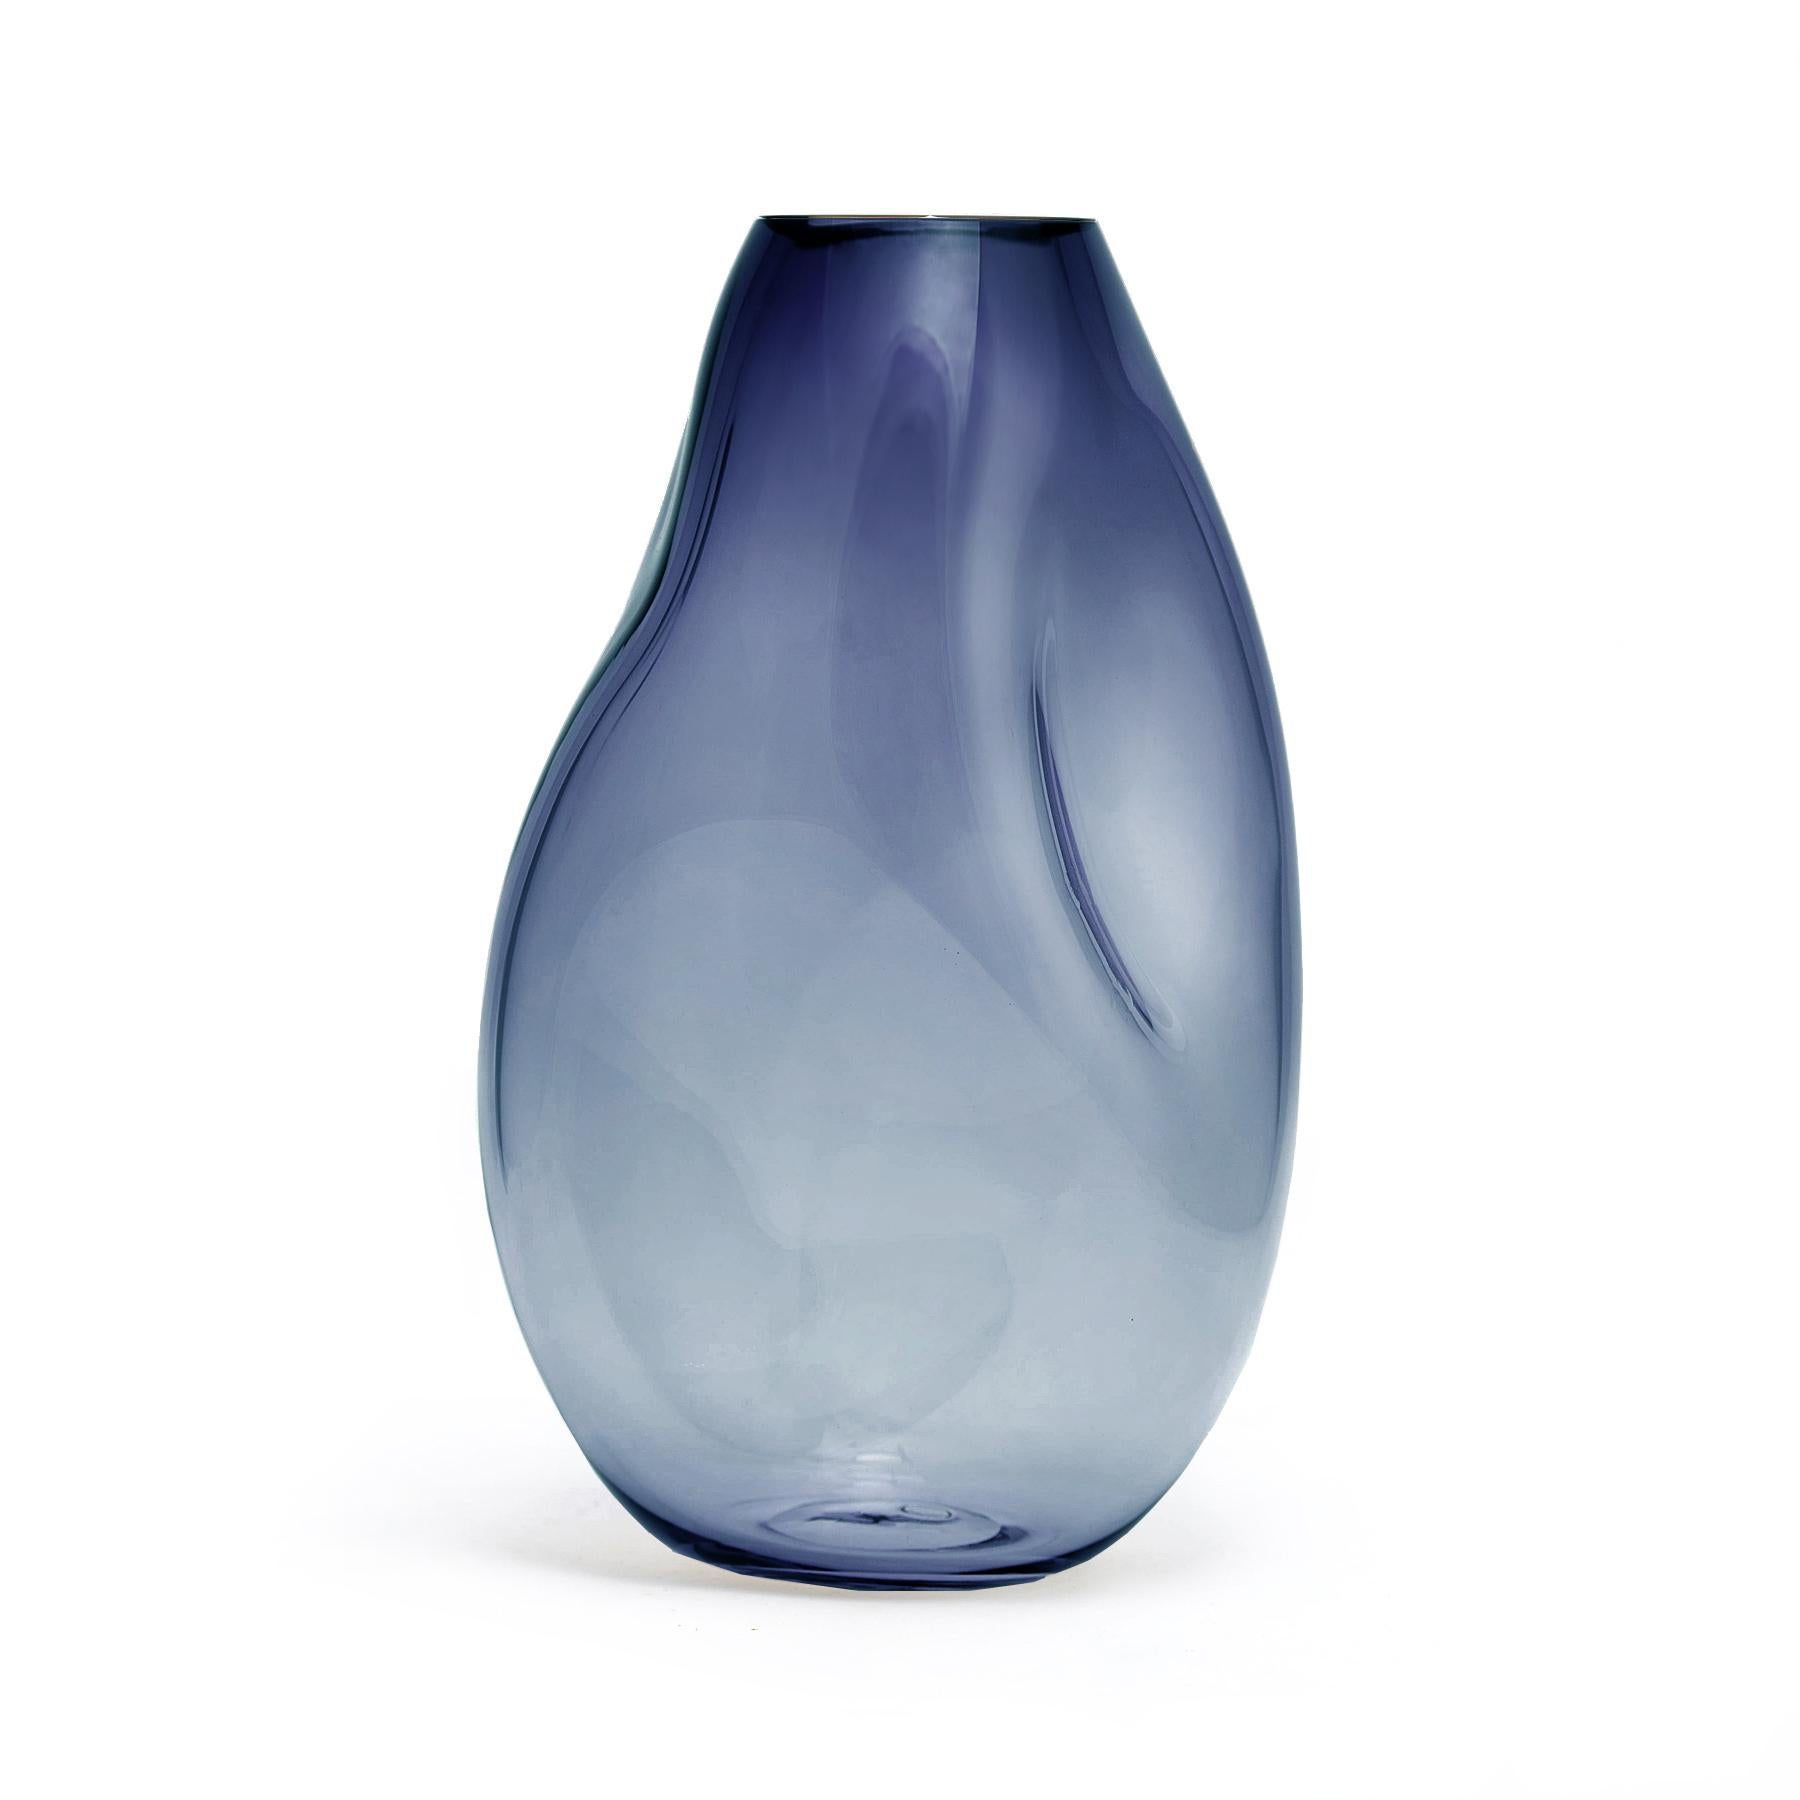 Supernova IV steel blue L vase by Eloa
No UL listed 
Material: glass
Dimensions: D15 x W17 x H41 cm
Also available in different colours and dimensions.

SUPERNOVA is a collection of vases and bowls that, though they don‘t shine
themselves, none the